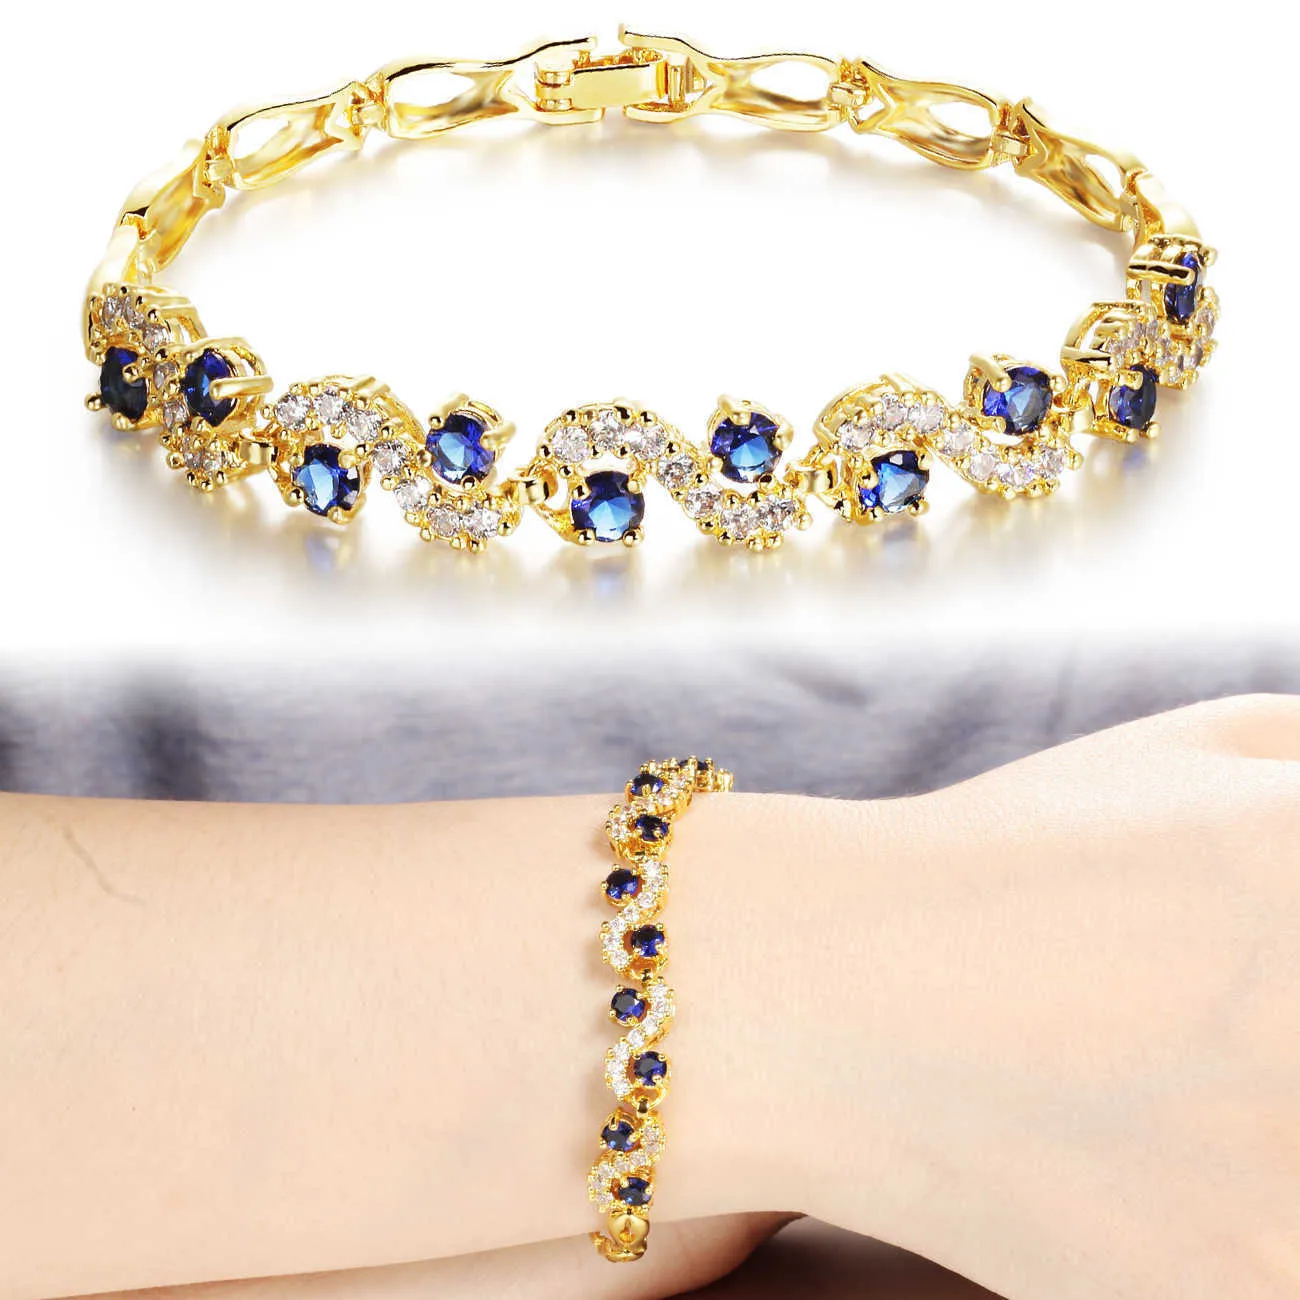 Tb-147 3a Luo Code Zircon Copper Gold-plated Women's Bracelet Blue and White Diamonds Fashionable Light Luxury Jewelry Q0720